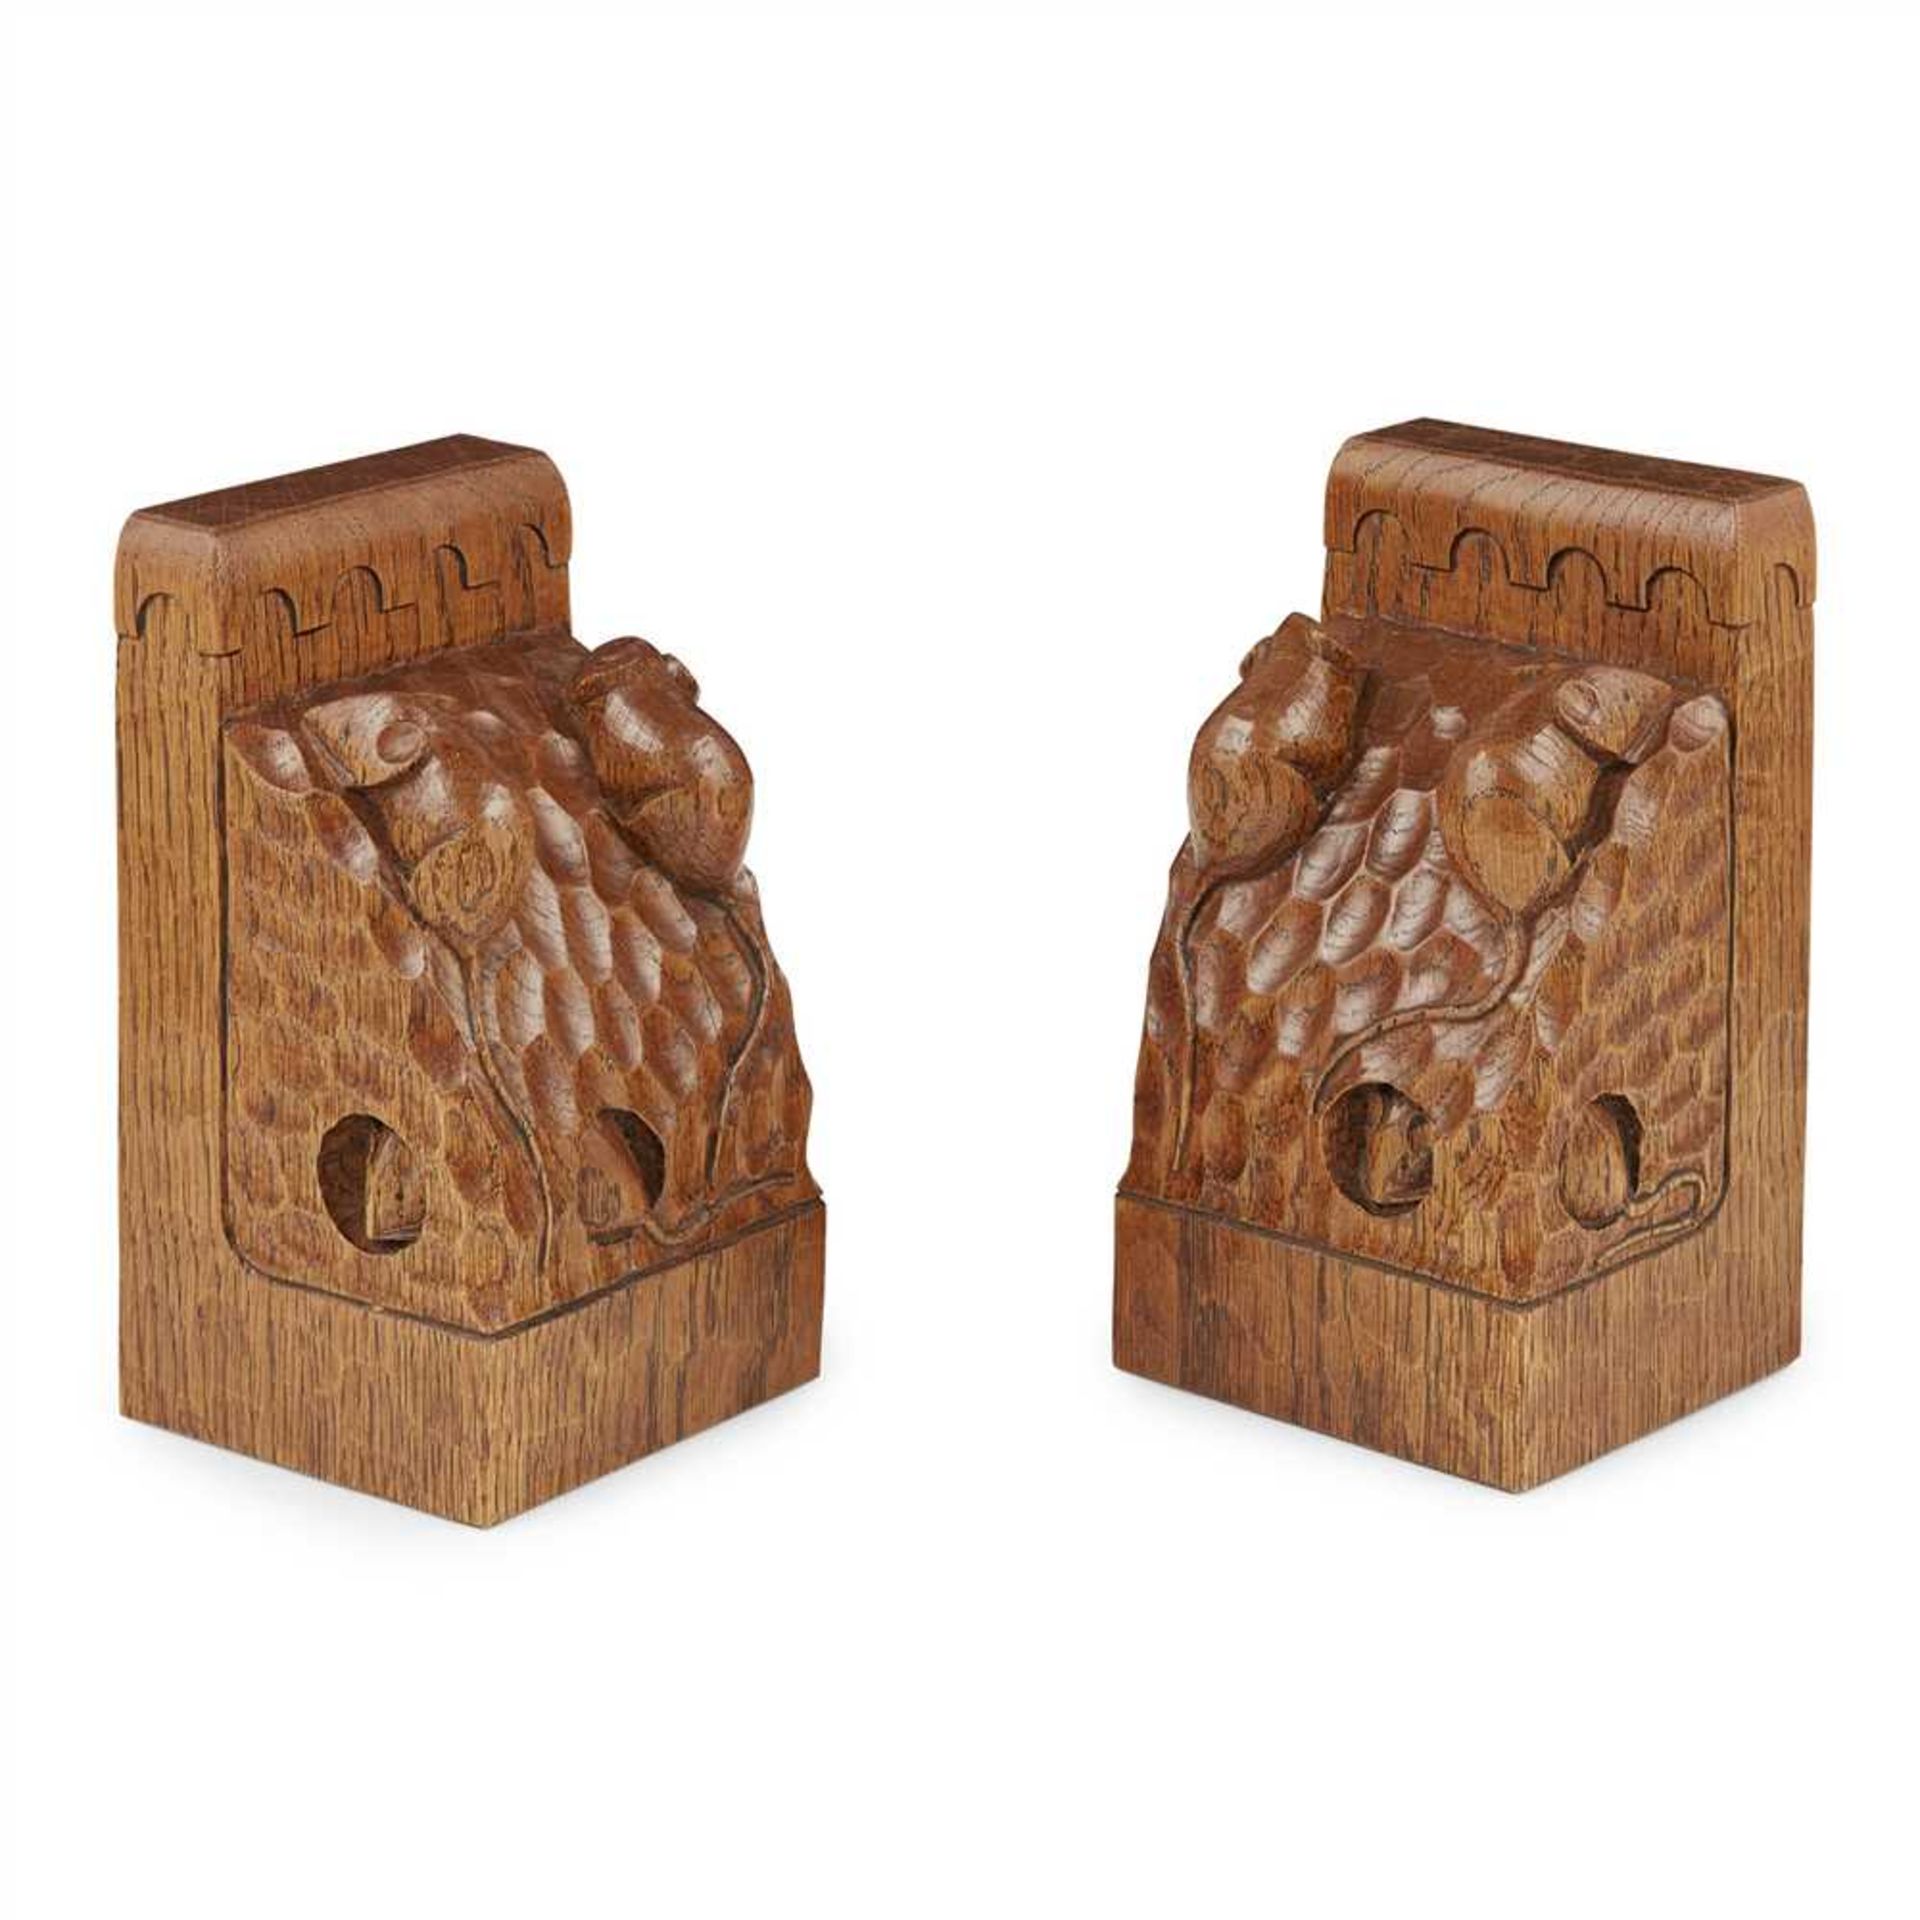 WORKSHOP OF ROBERT 'MOUSEMAN' THOMPSON PAIR OF OAK TRIPLE MICE BOOKENDS, CIRCA 1970 each carved with